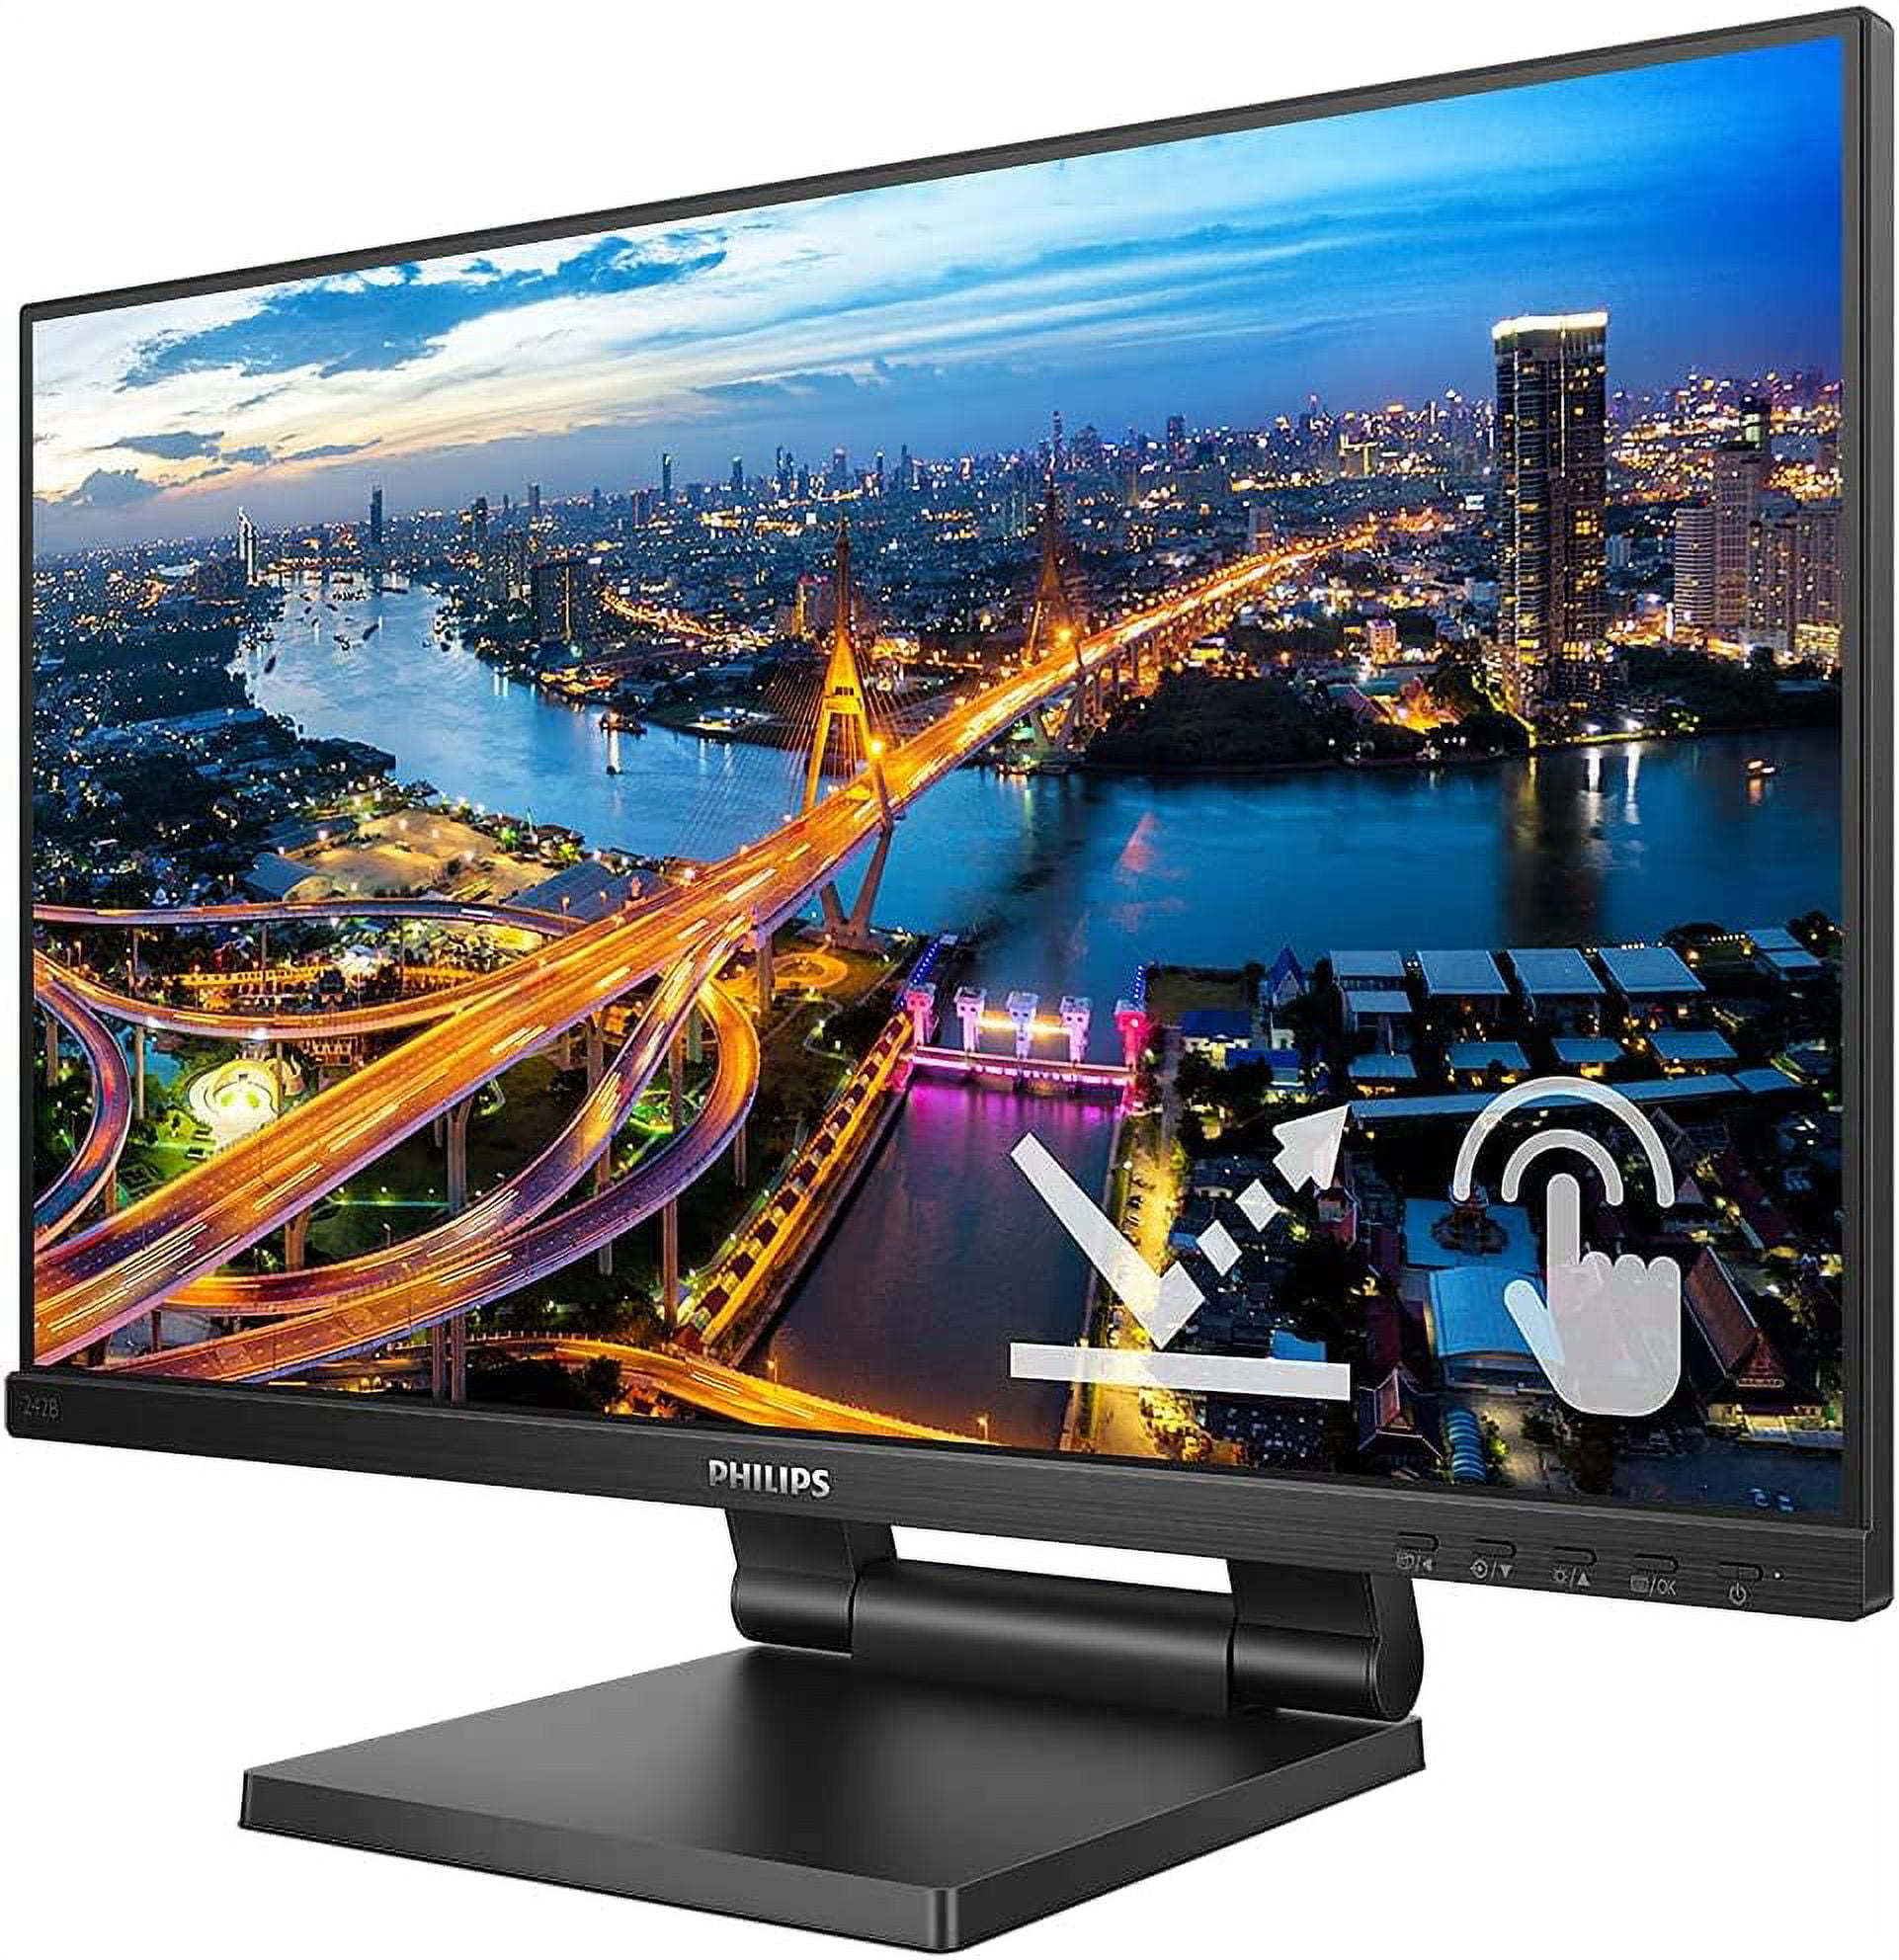 Monitor LCD monitor with SmoothTouch 242B9T/27